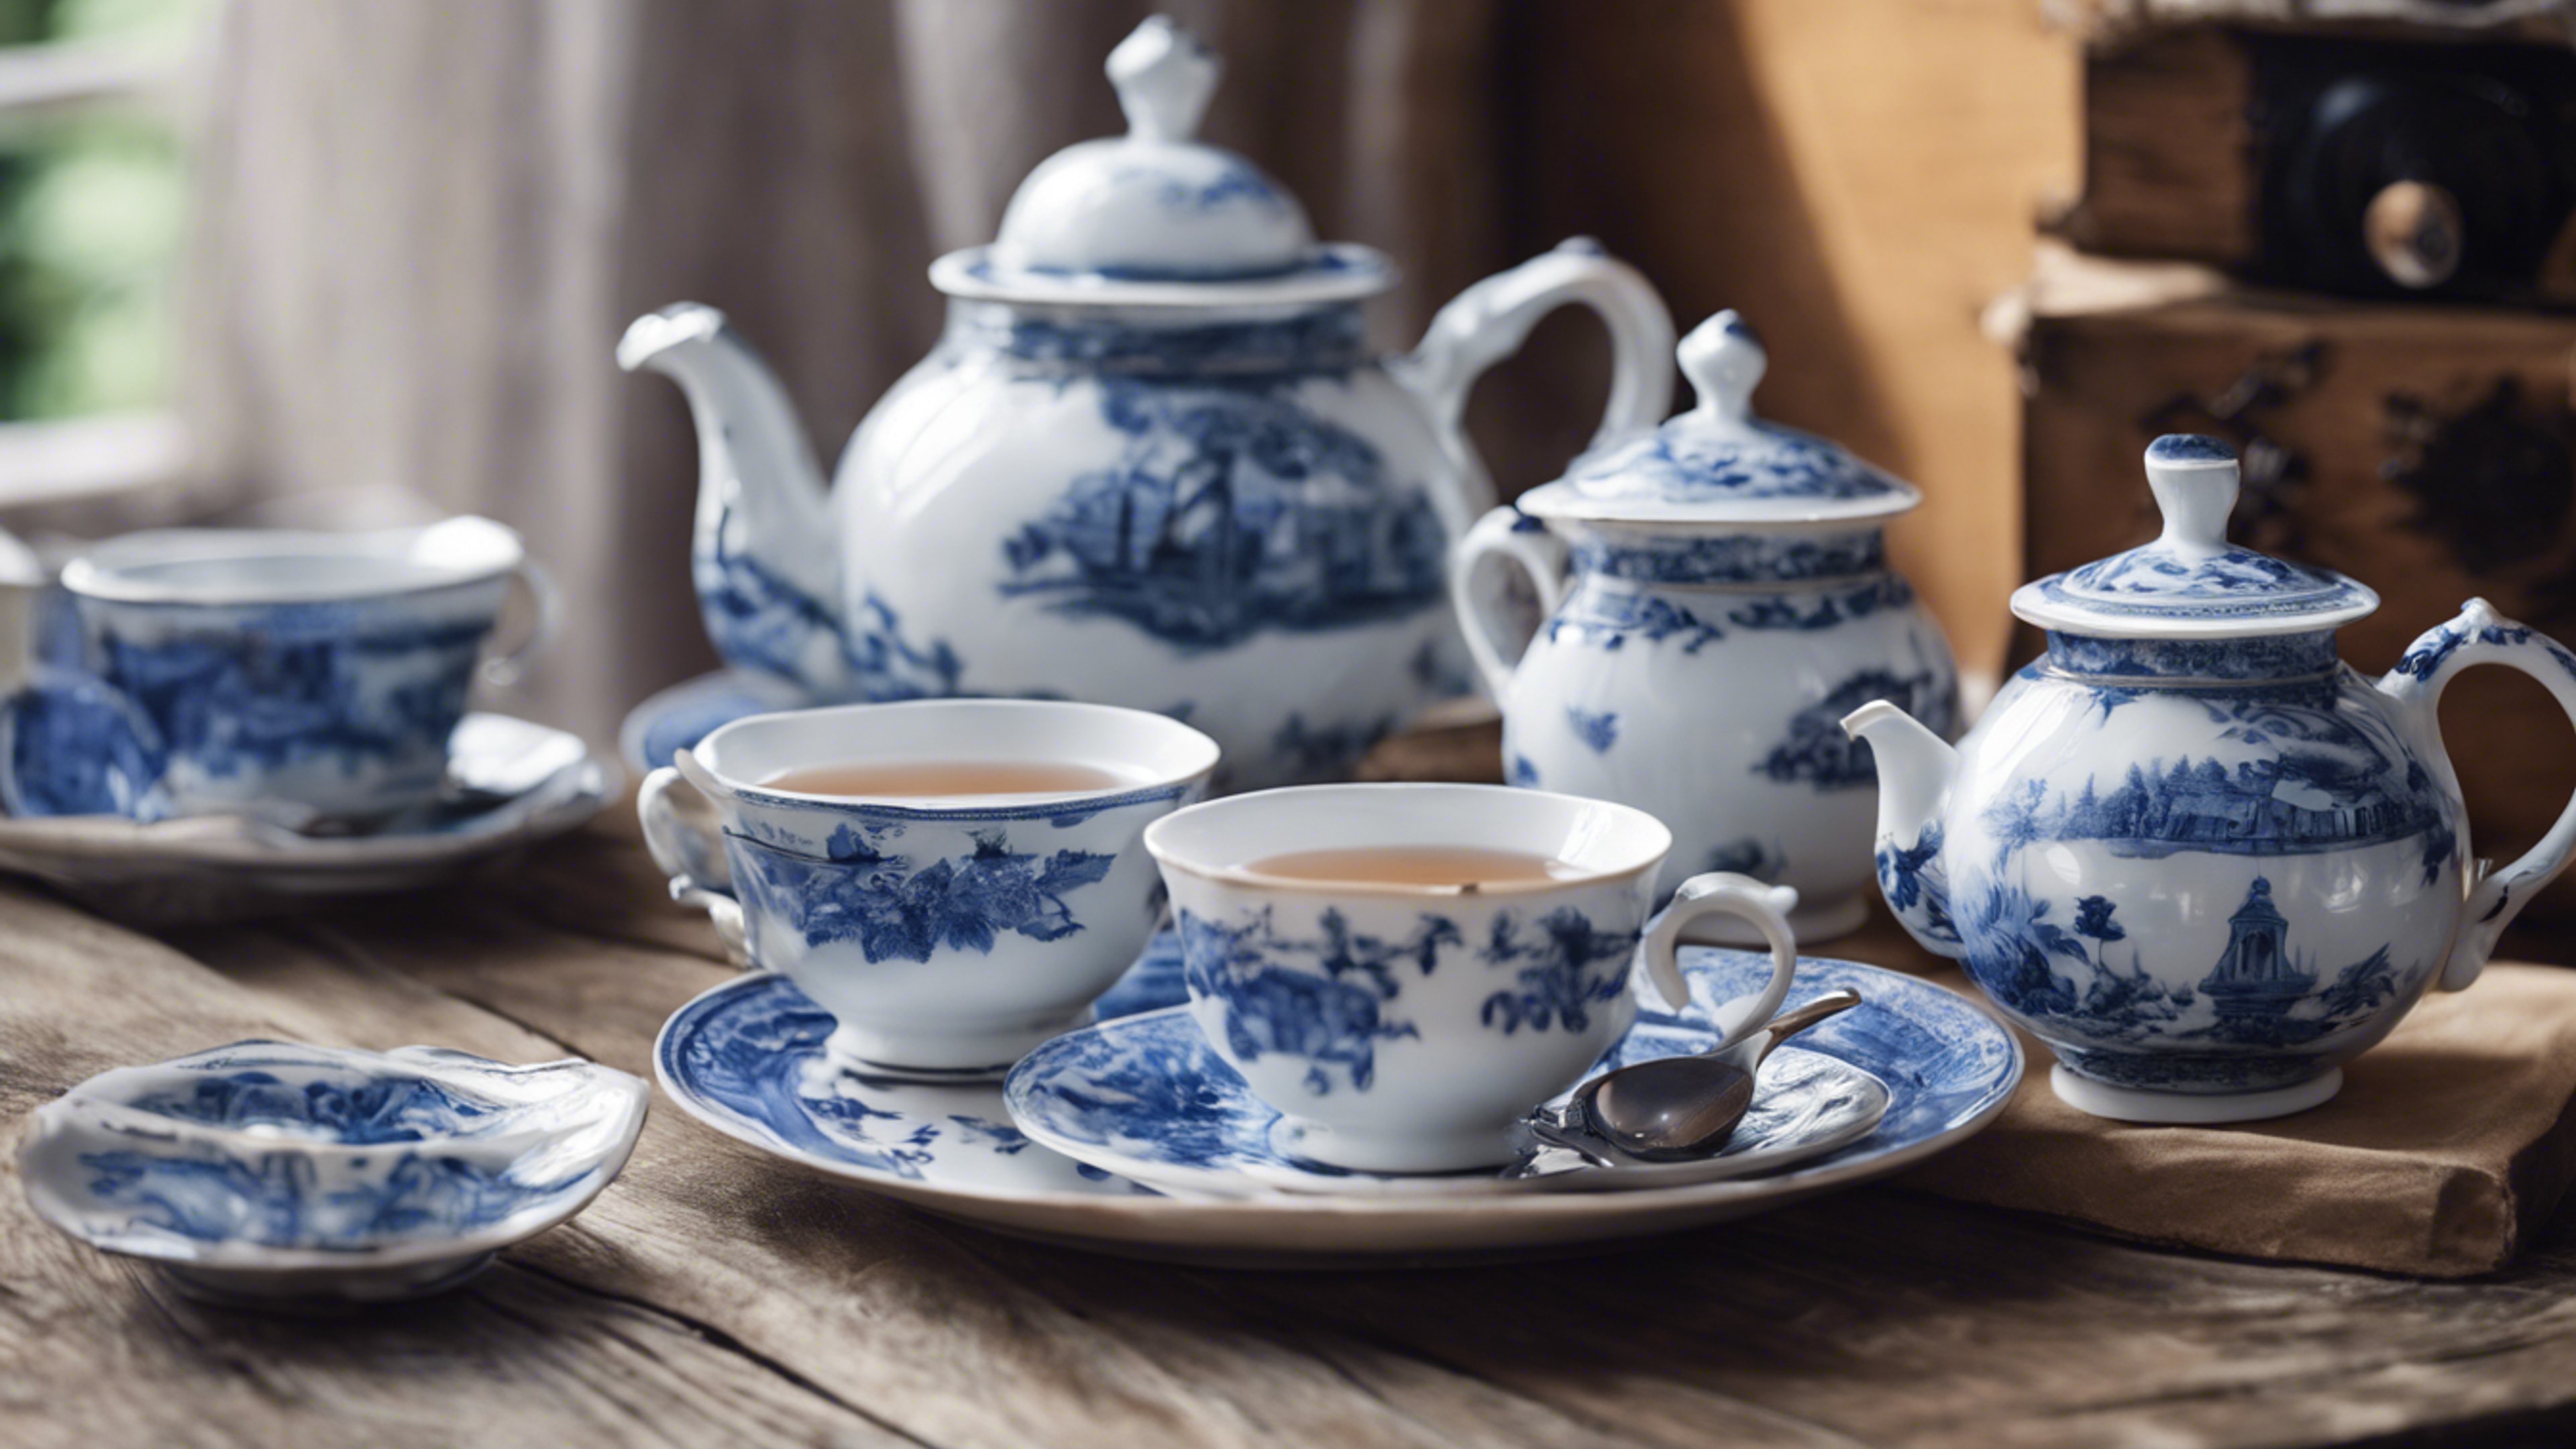 Vintage porcelain tea set in blue and white, placed on a rustic wooden table. 벽지[4fbd951e4e494dd09da7]